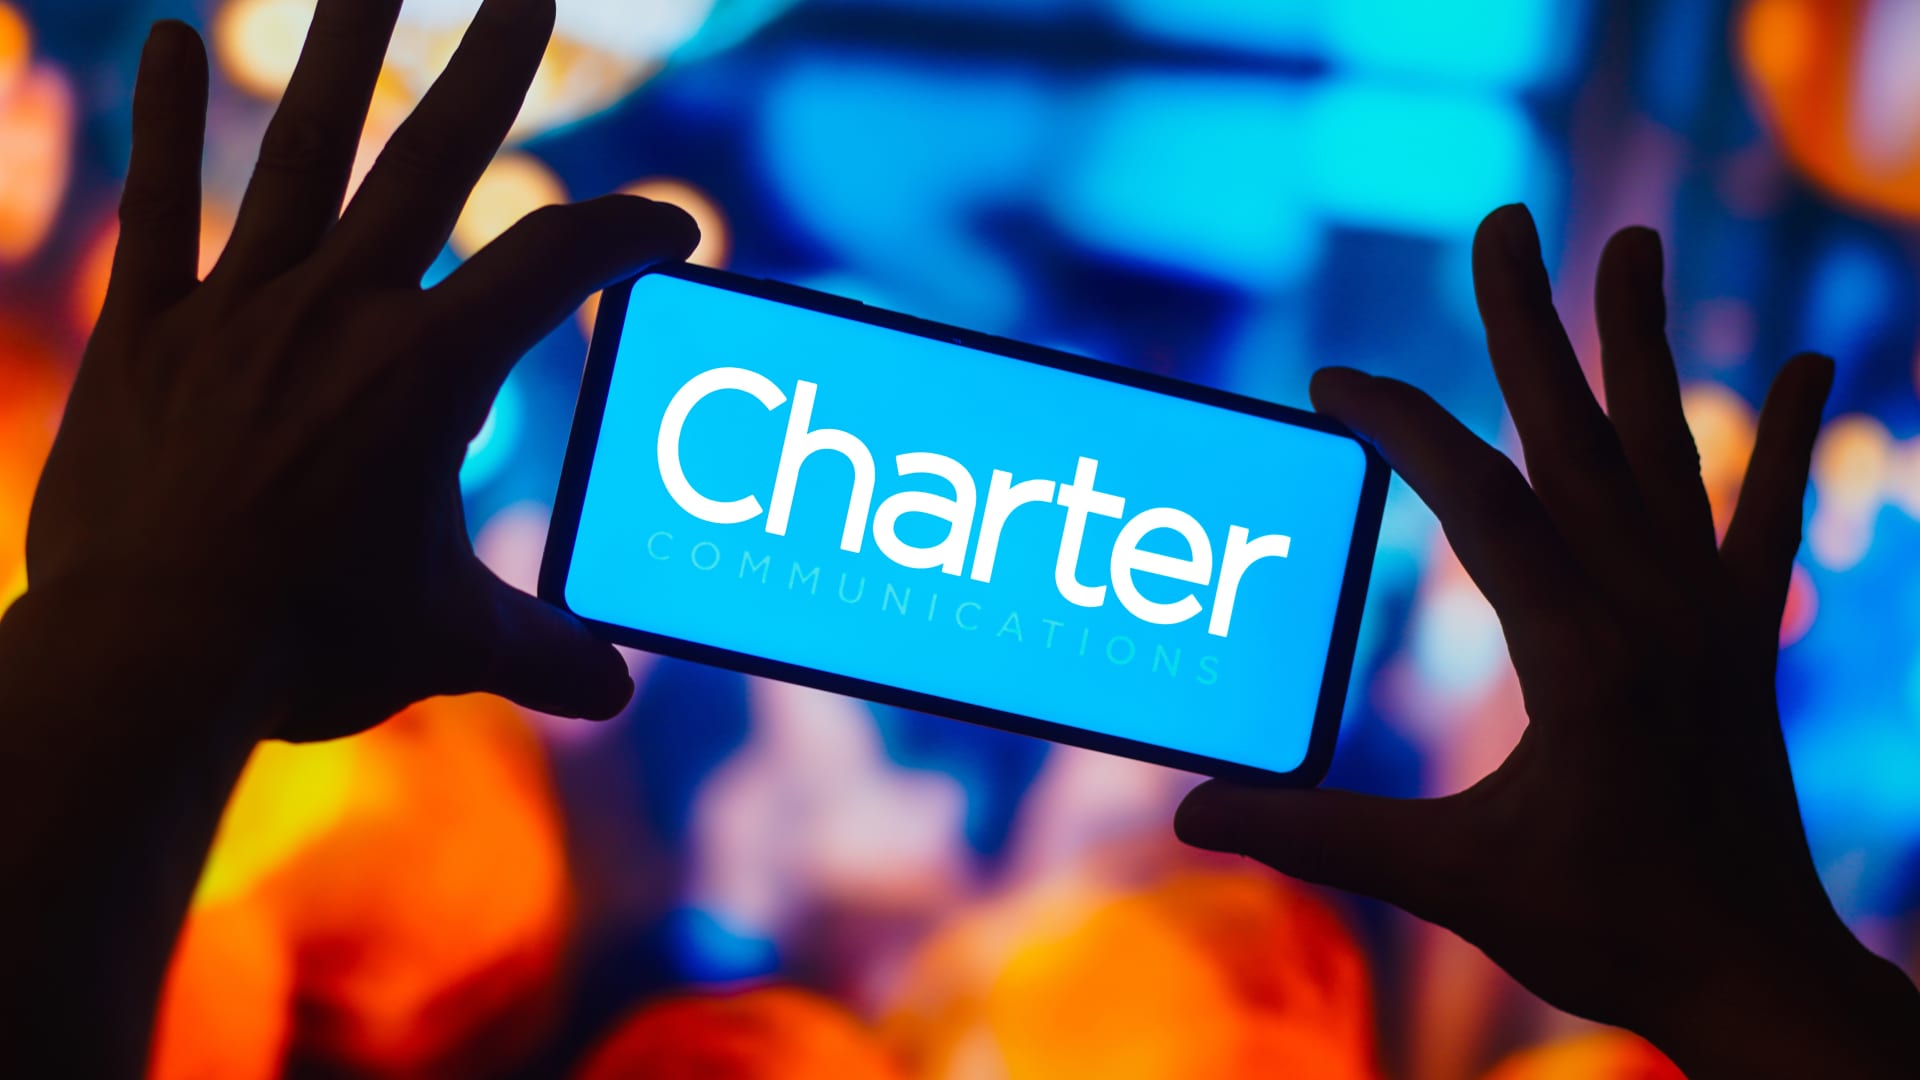 Charter locations media firms on survey in describe to place pay-TV bundle